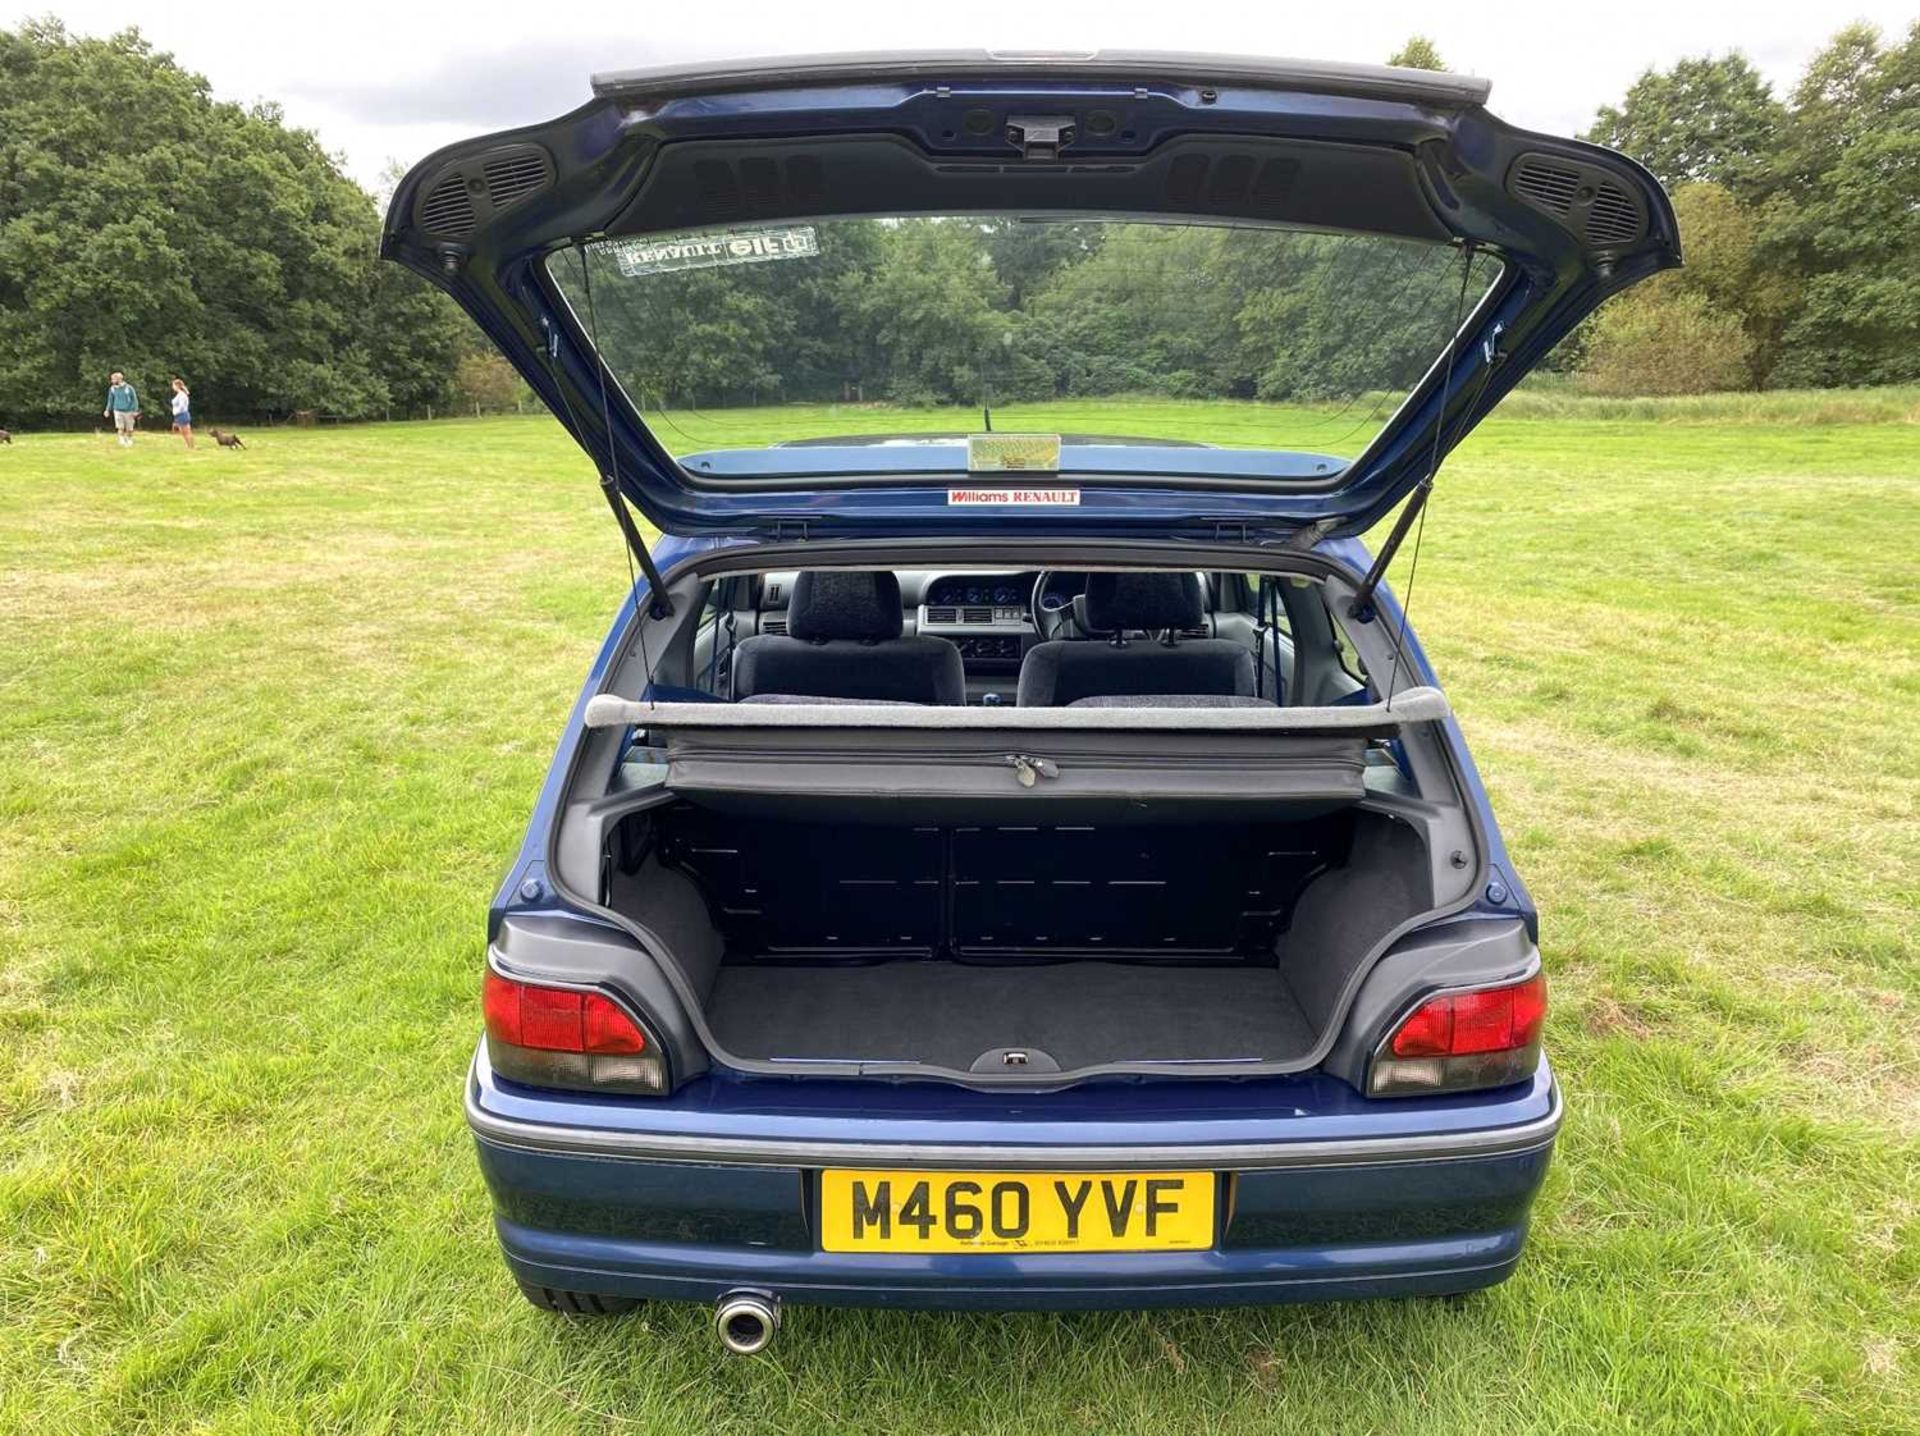 1995 Renault Clio Williams 2 UK-delivered, second series model and said to be one of just 482 produc - Image 19 of 66